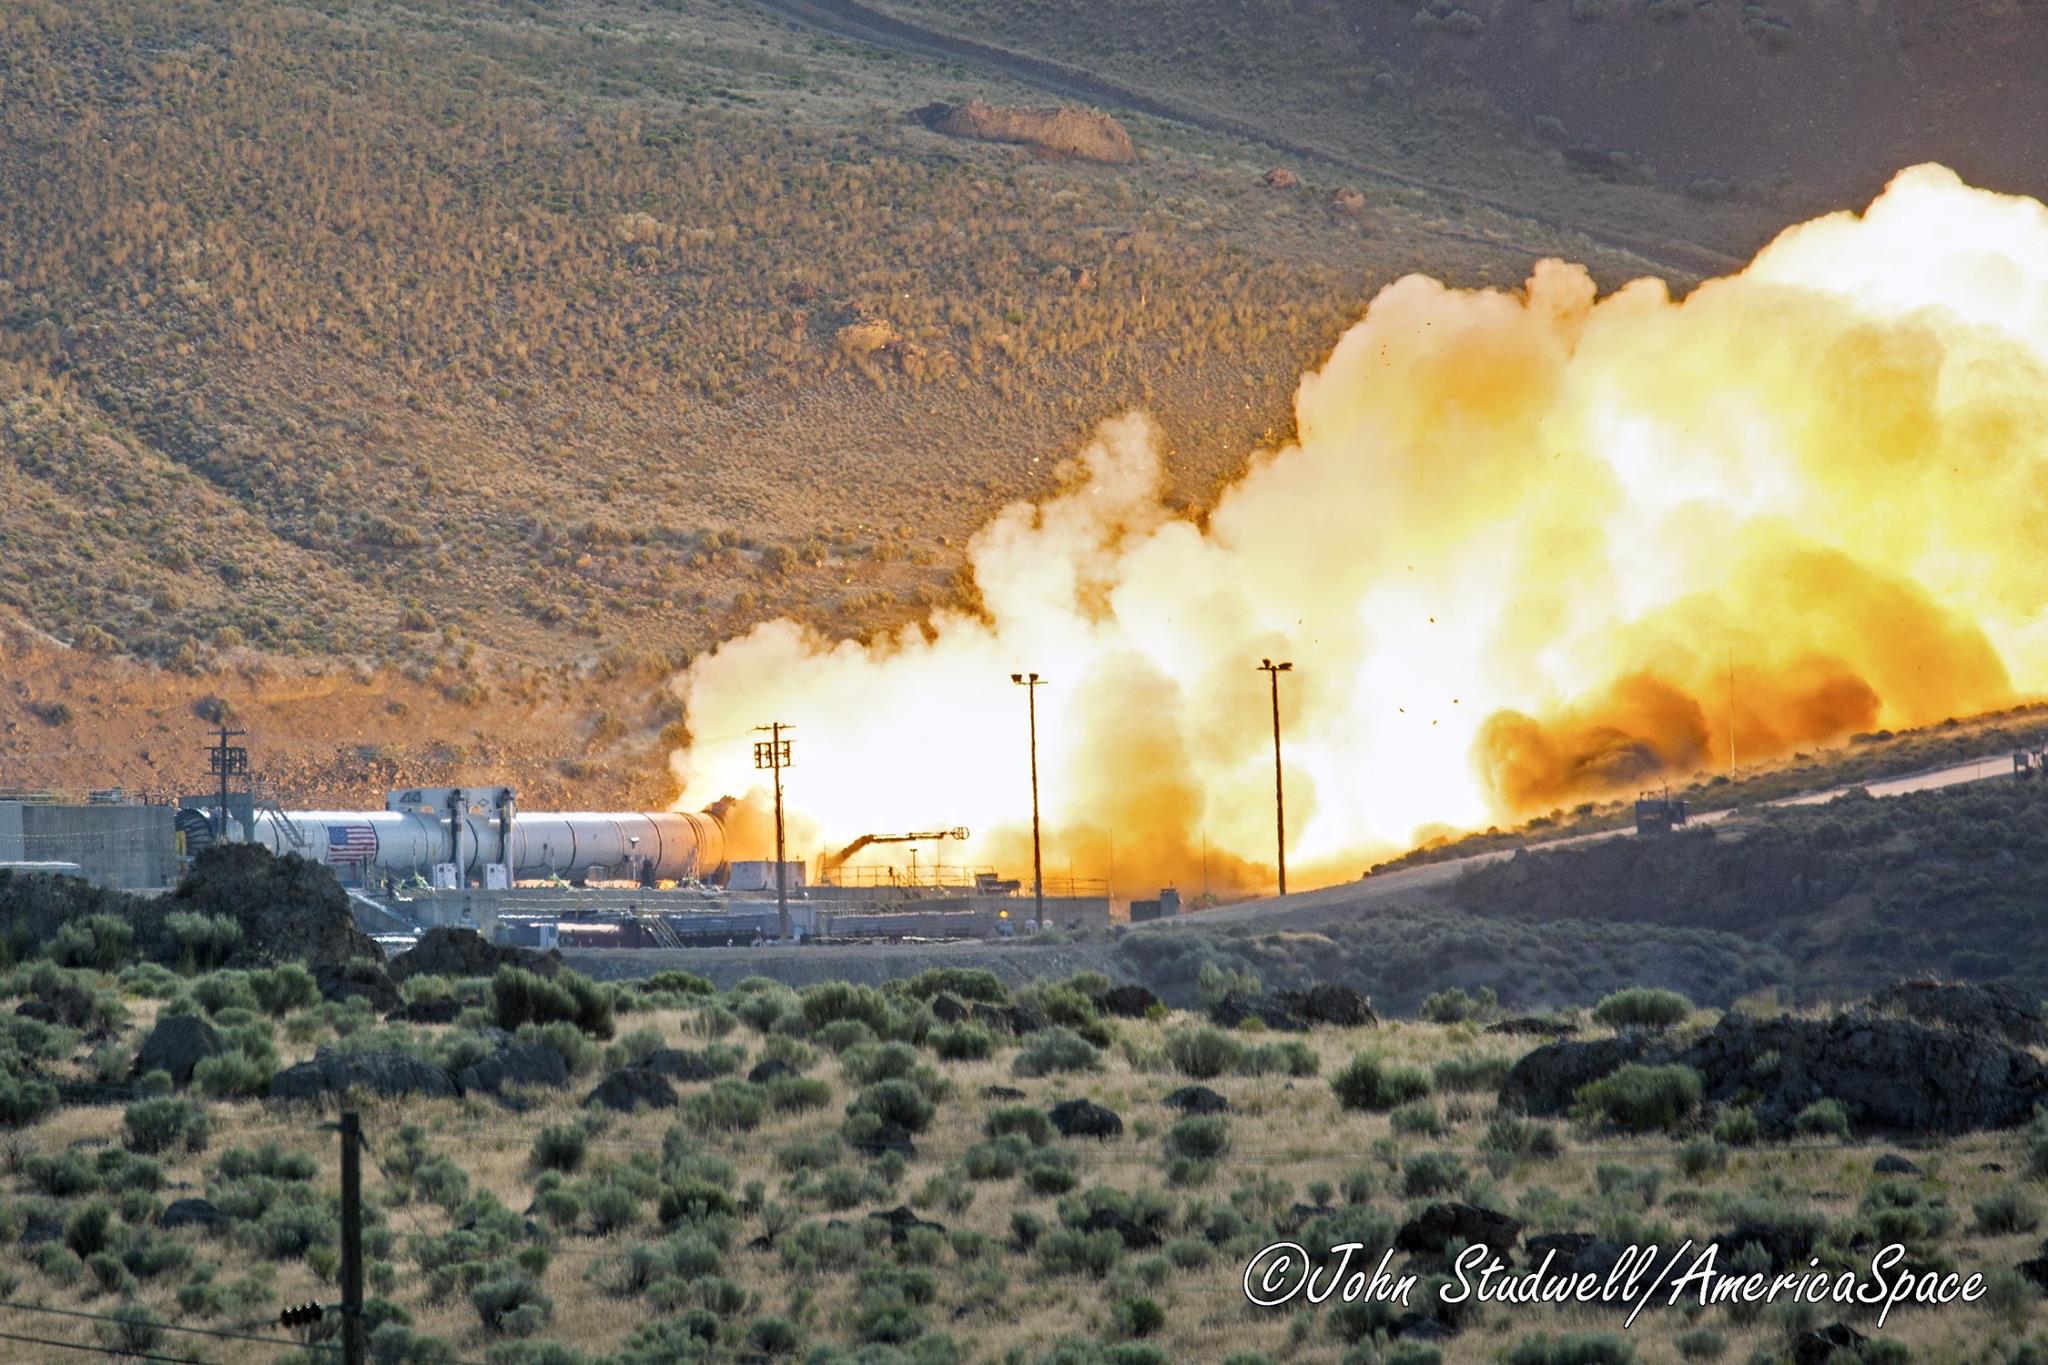 booster for the most powerful rocket in the world, NASA’s Space Launch System (SLS), successfully fired up Tuesday for its second qualification ground test at Orbital ATK's test facilities in Promontory, Utah. This was the last full-scale test for the booster before SLS’s first uncrewed test flight with NASA’s Orion spacecraft in late 2018, a key milestone on the agency’s Journey to Mars. Photo Credit: John Studwell / AmericaSpace